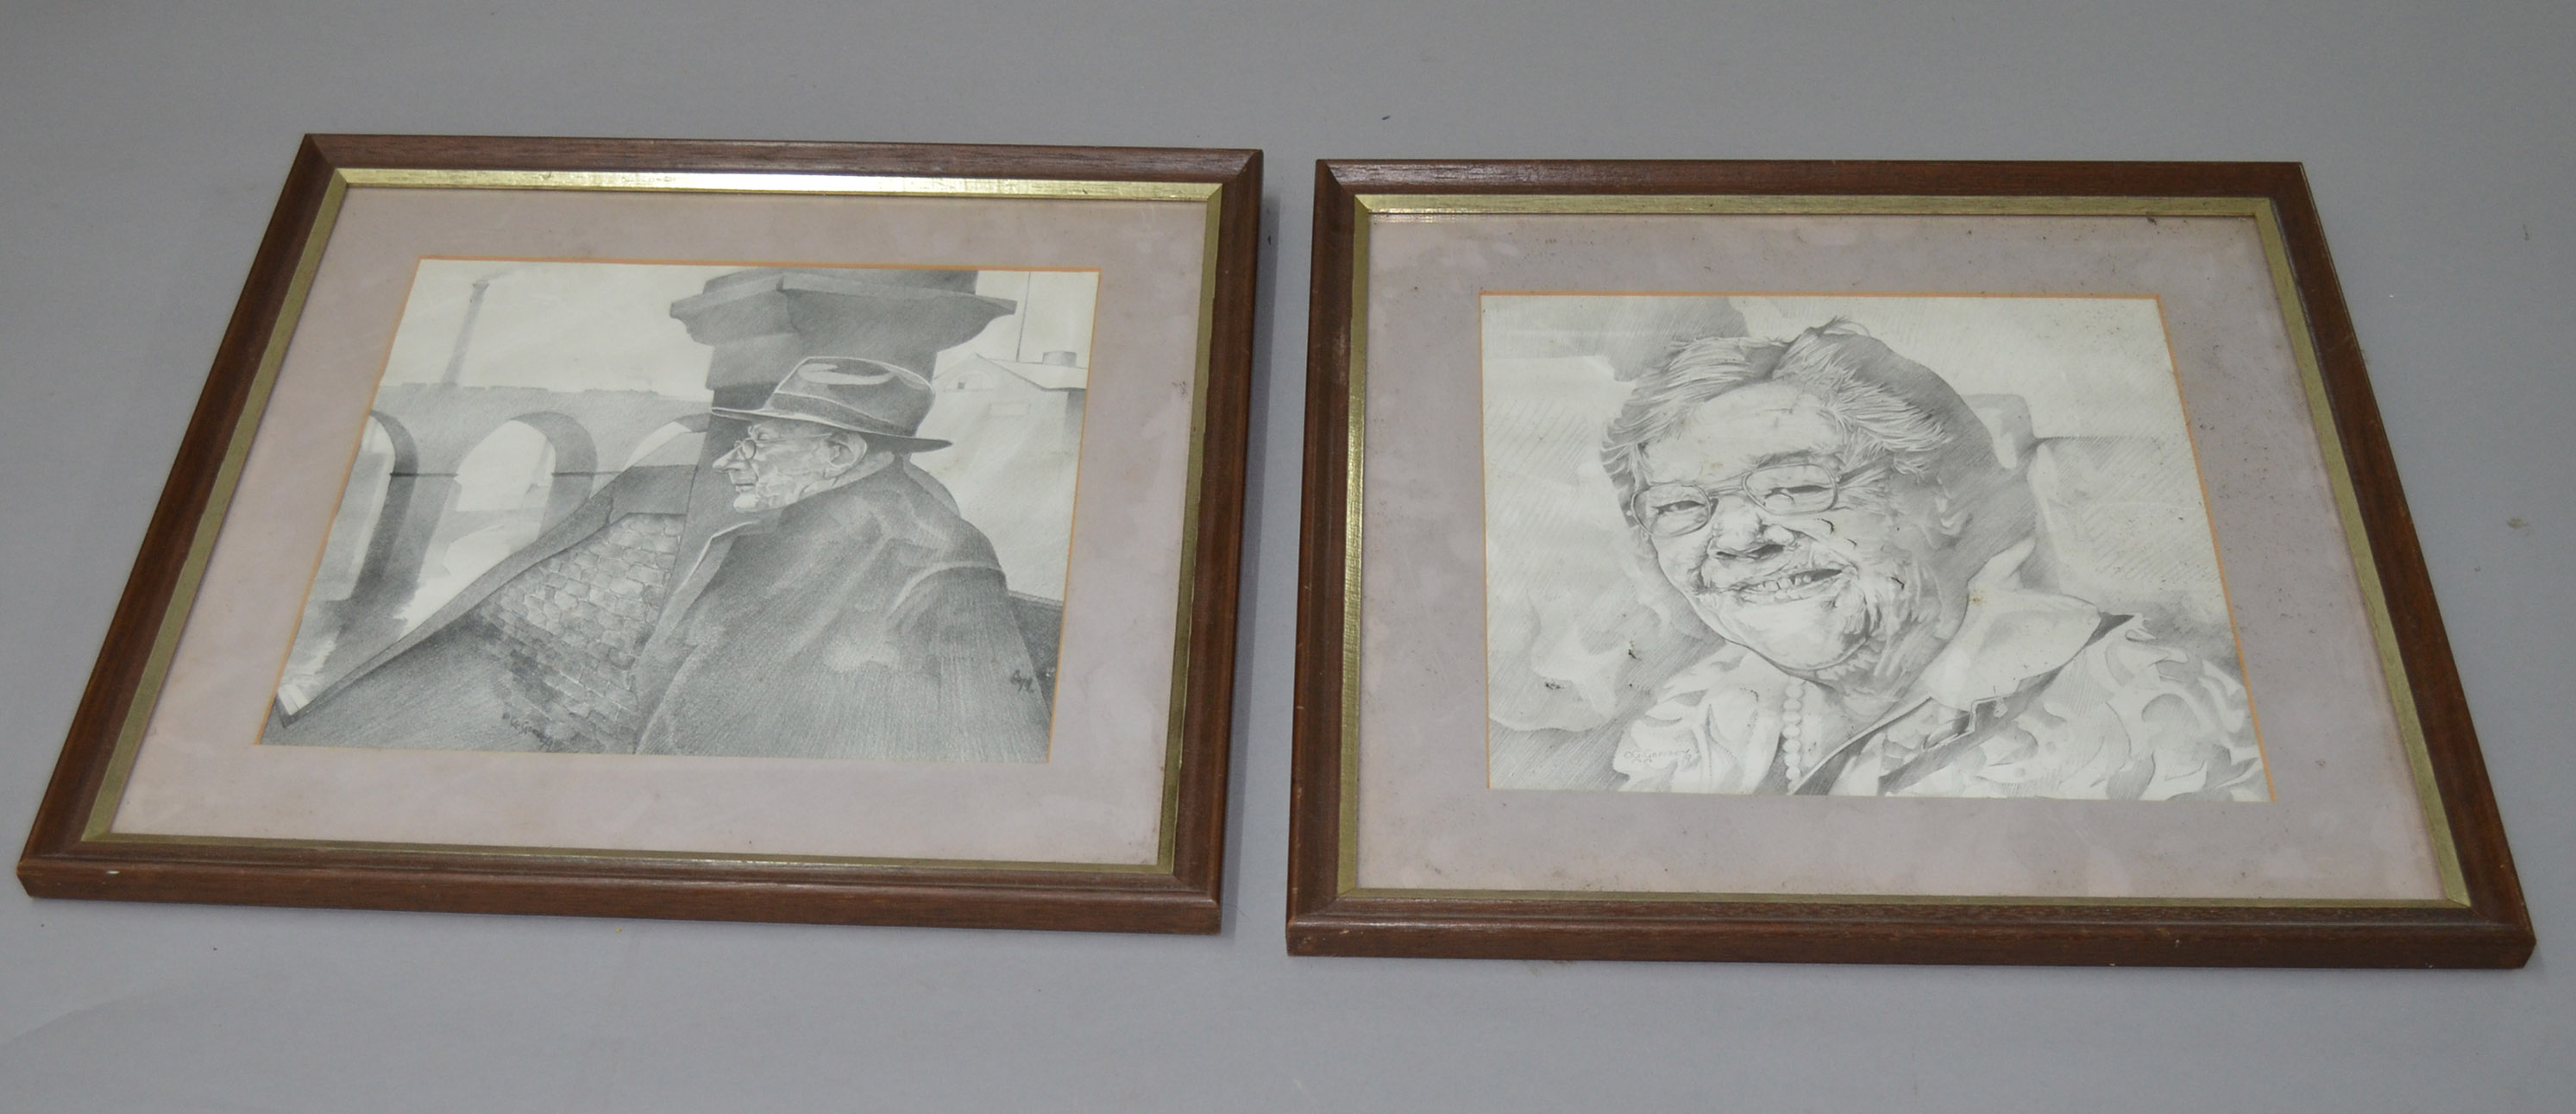 Garnery, G: two portrait prints of Lowry and companion, framed and glazed (height 27cm, length